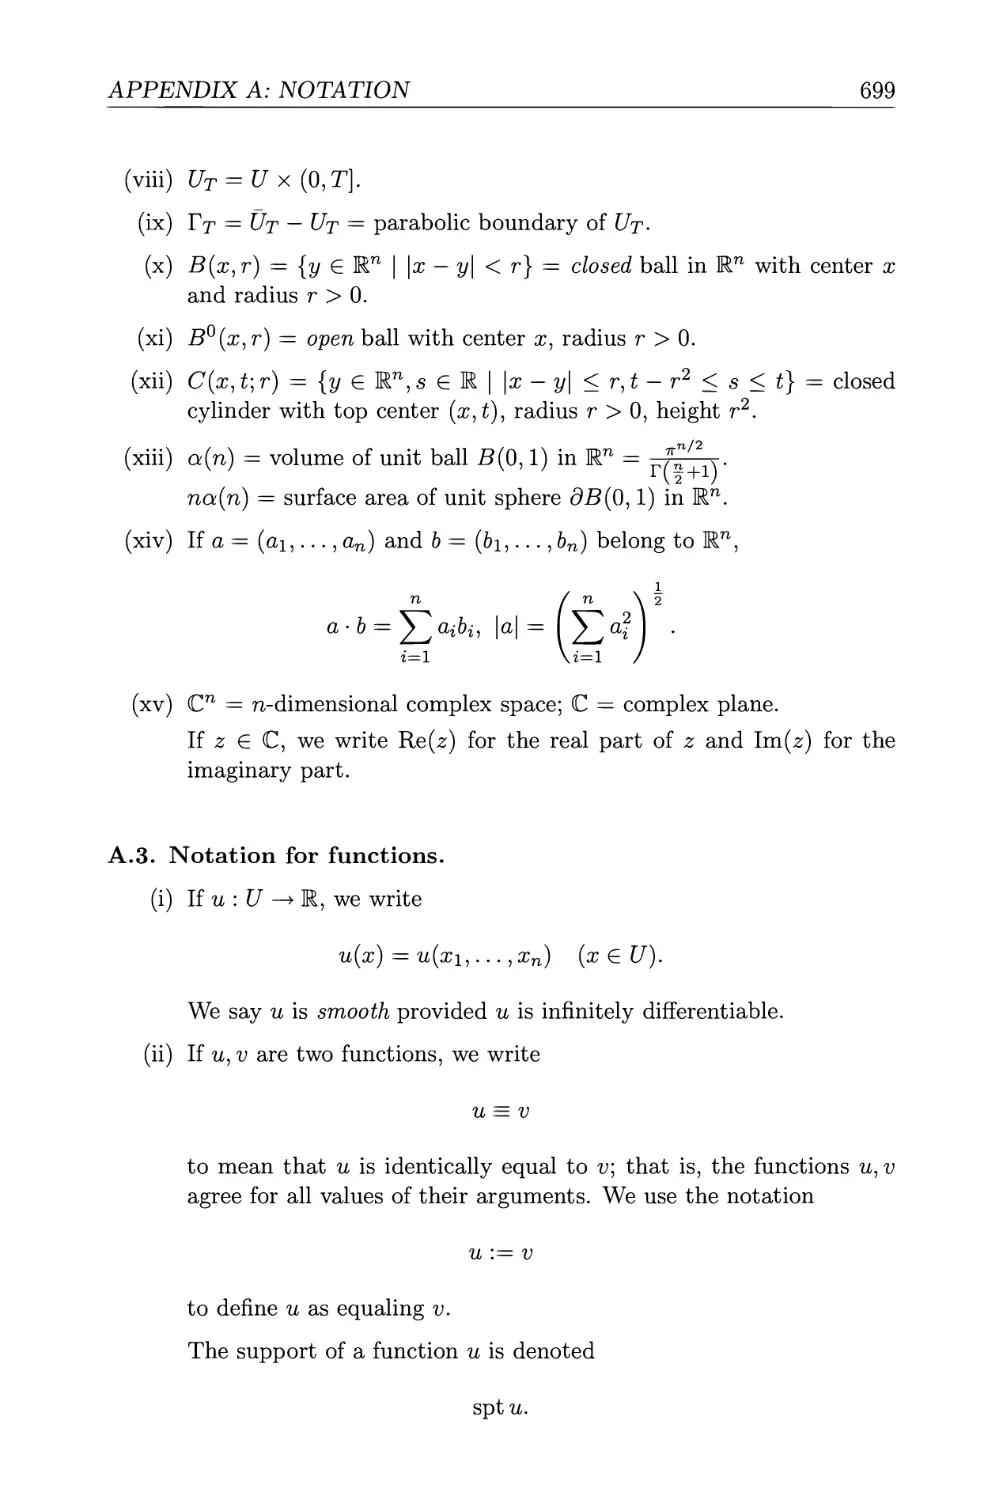 A.3. Notation for functions